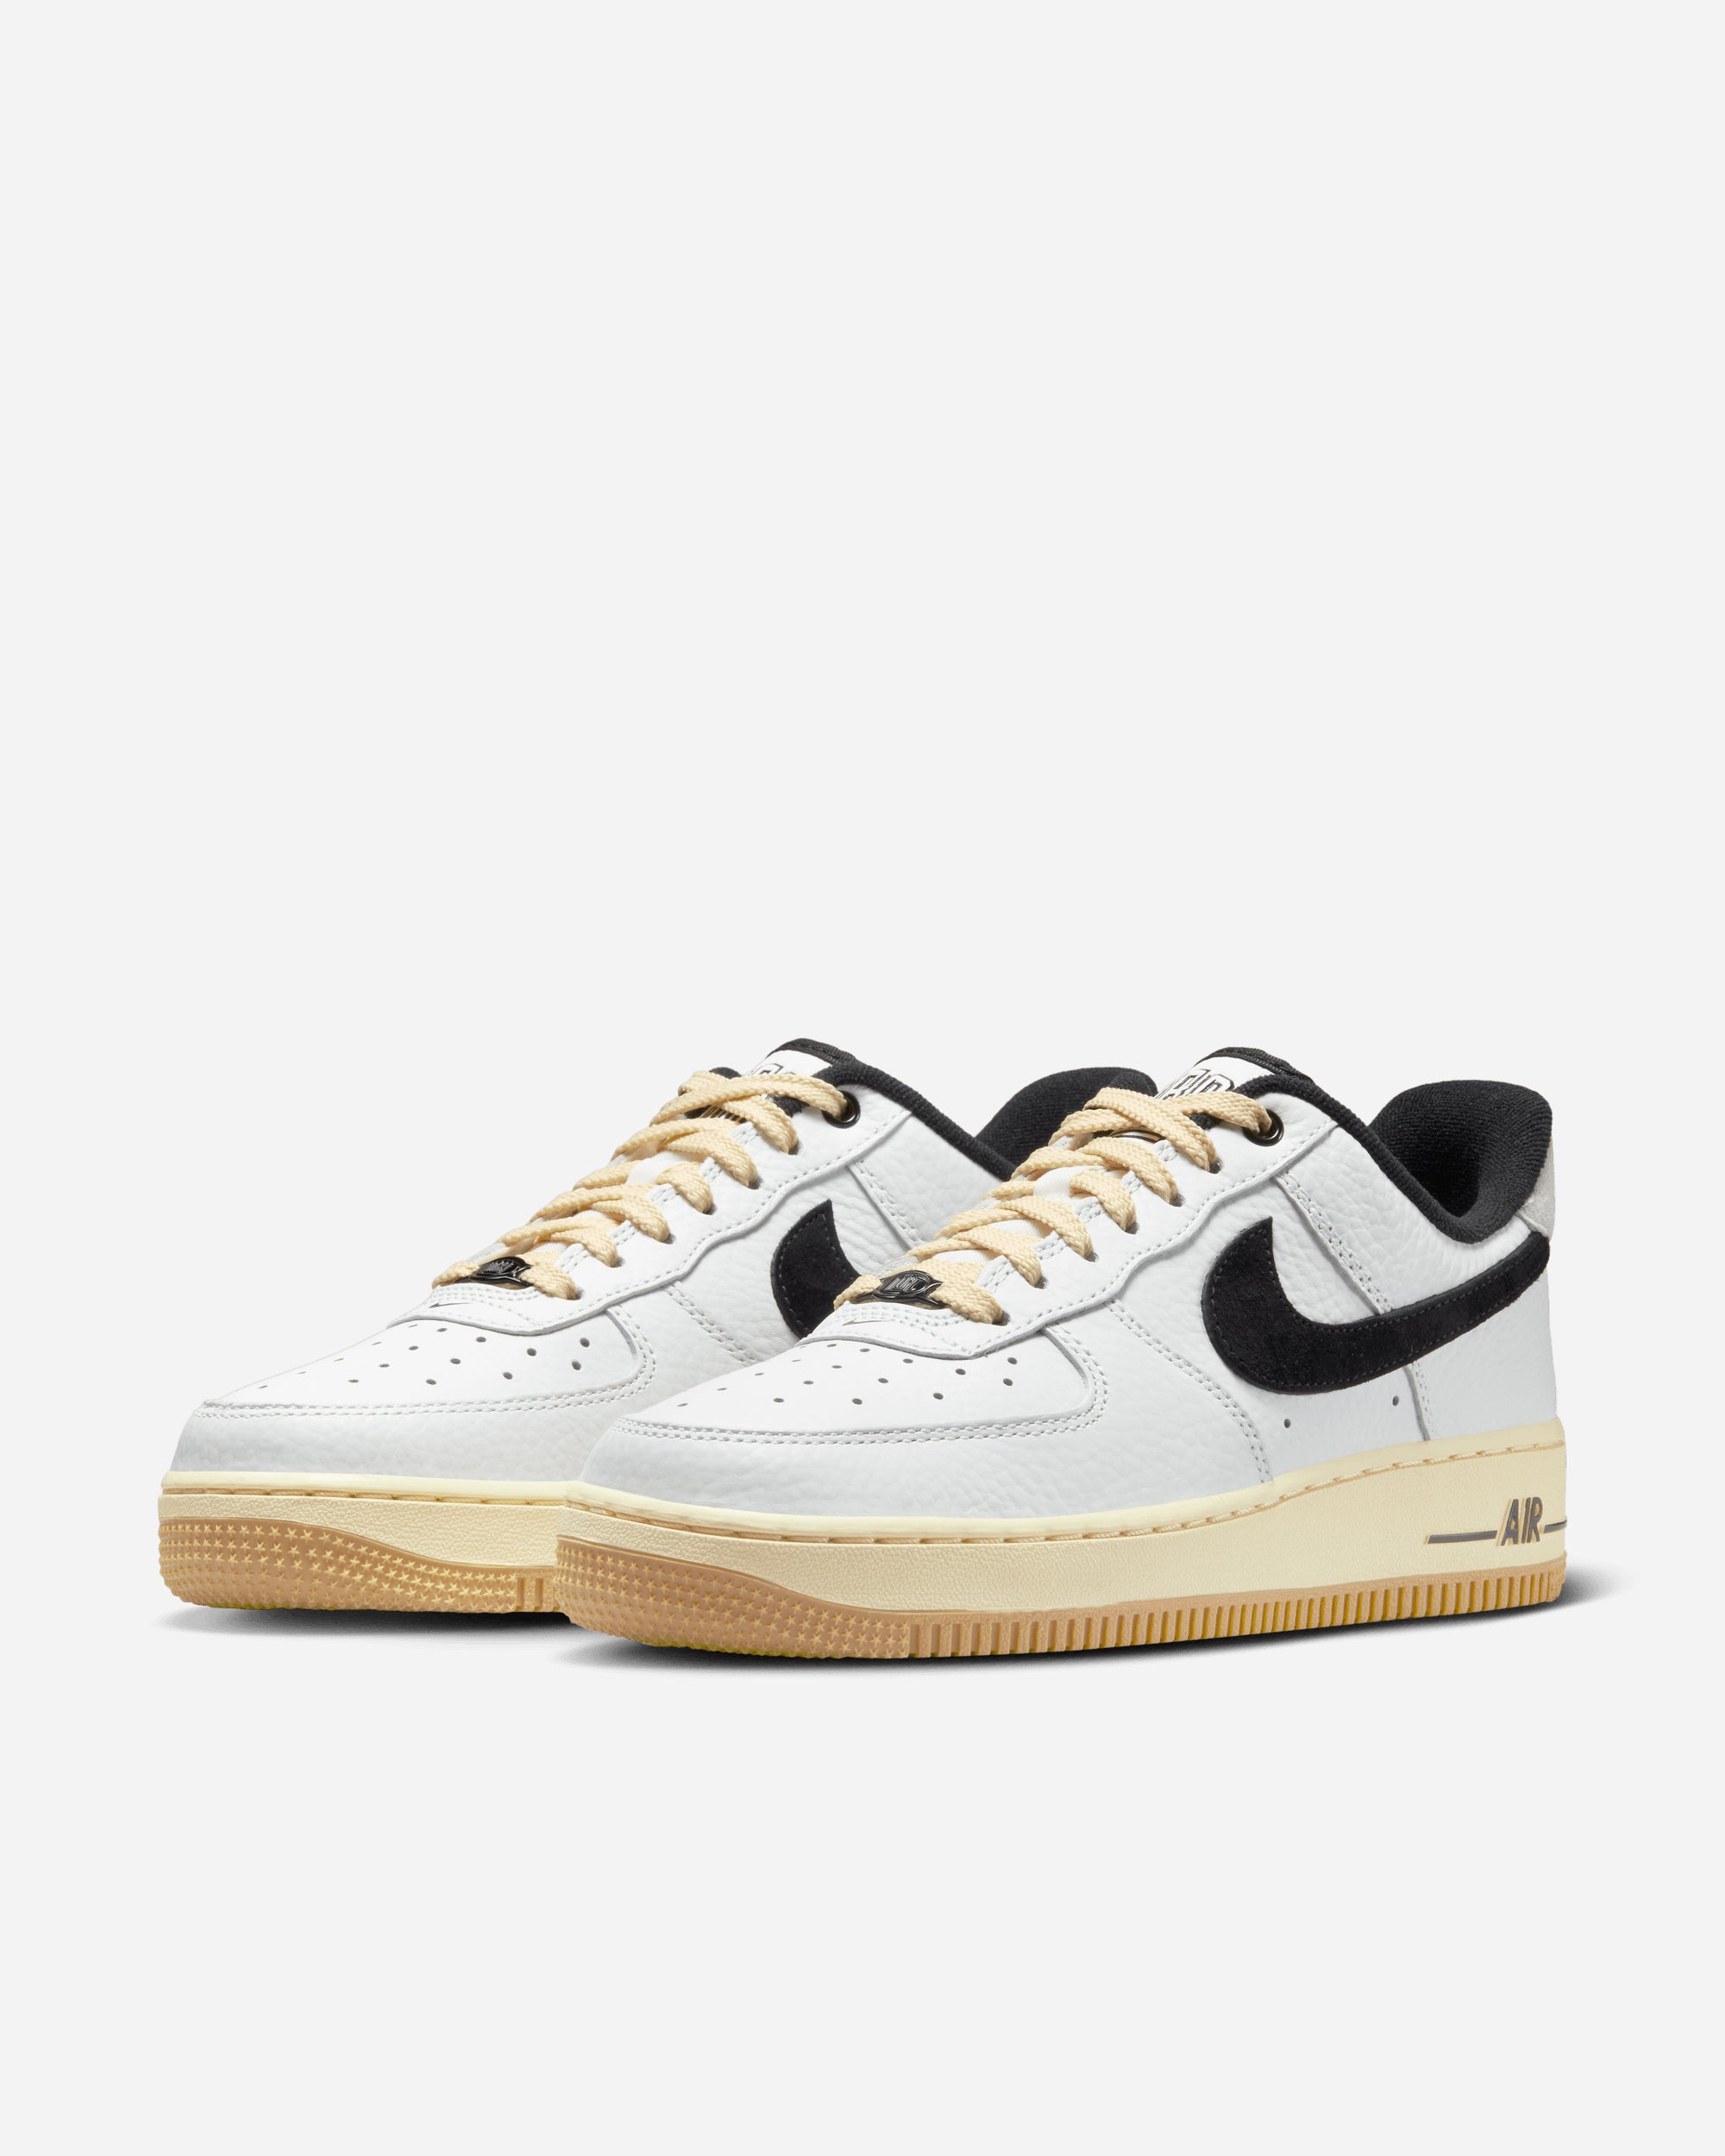 Nike Air Force 1'07 'Command Force' SUMMIT WHITE/BLACK-MUSLIN DR0148-101